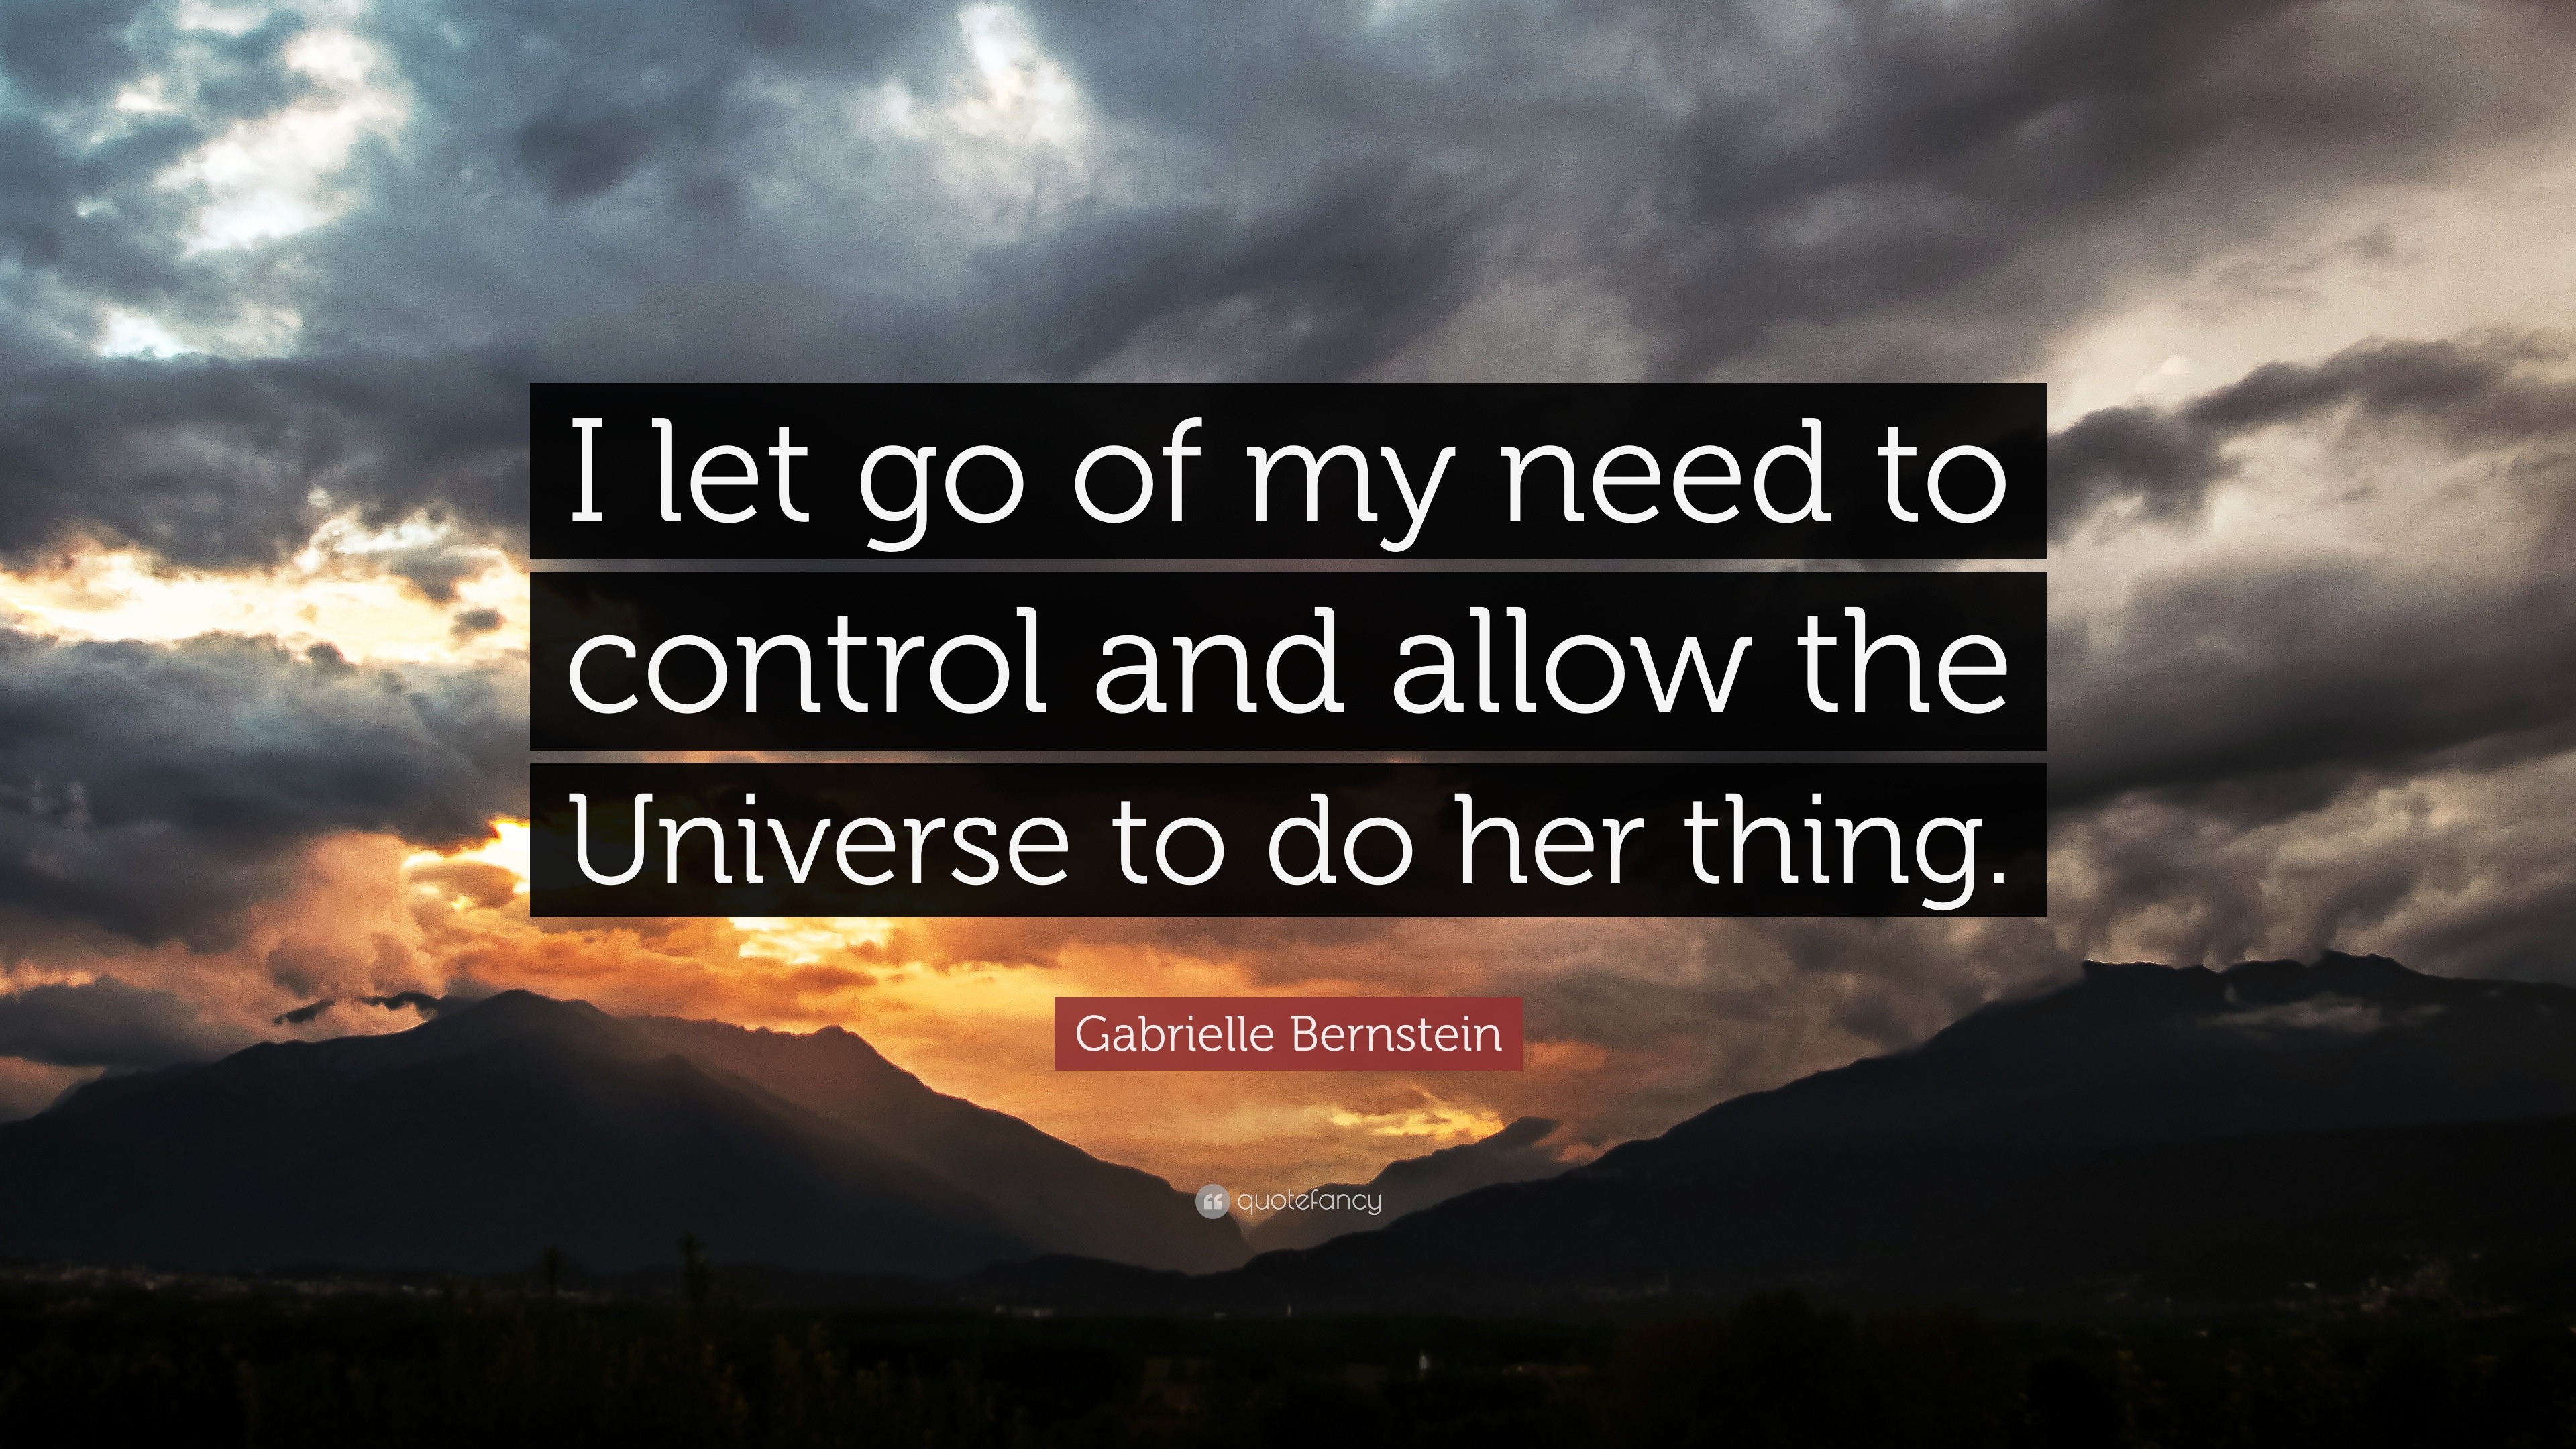 Gabrielle Bernstein Quote: “I let go of my need to control and allow